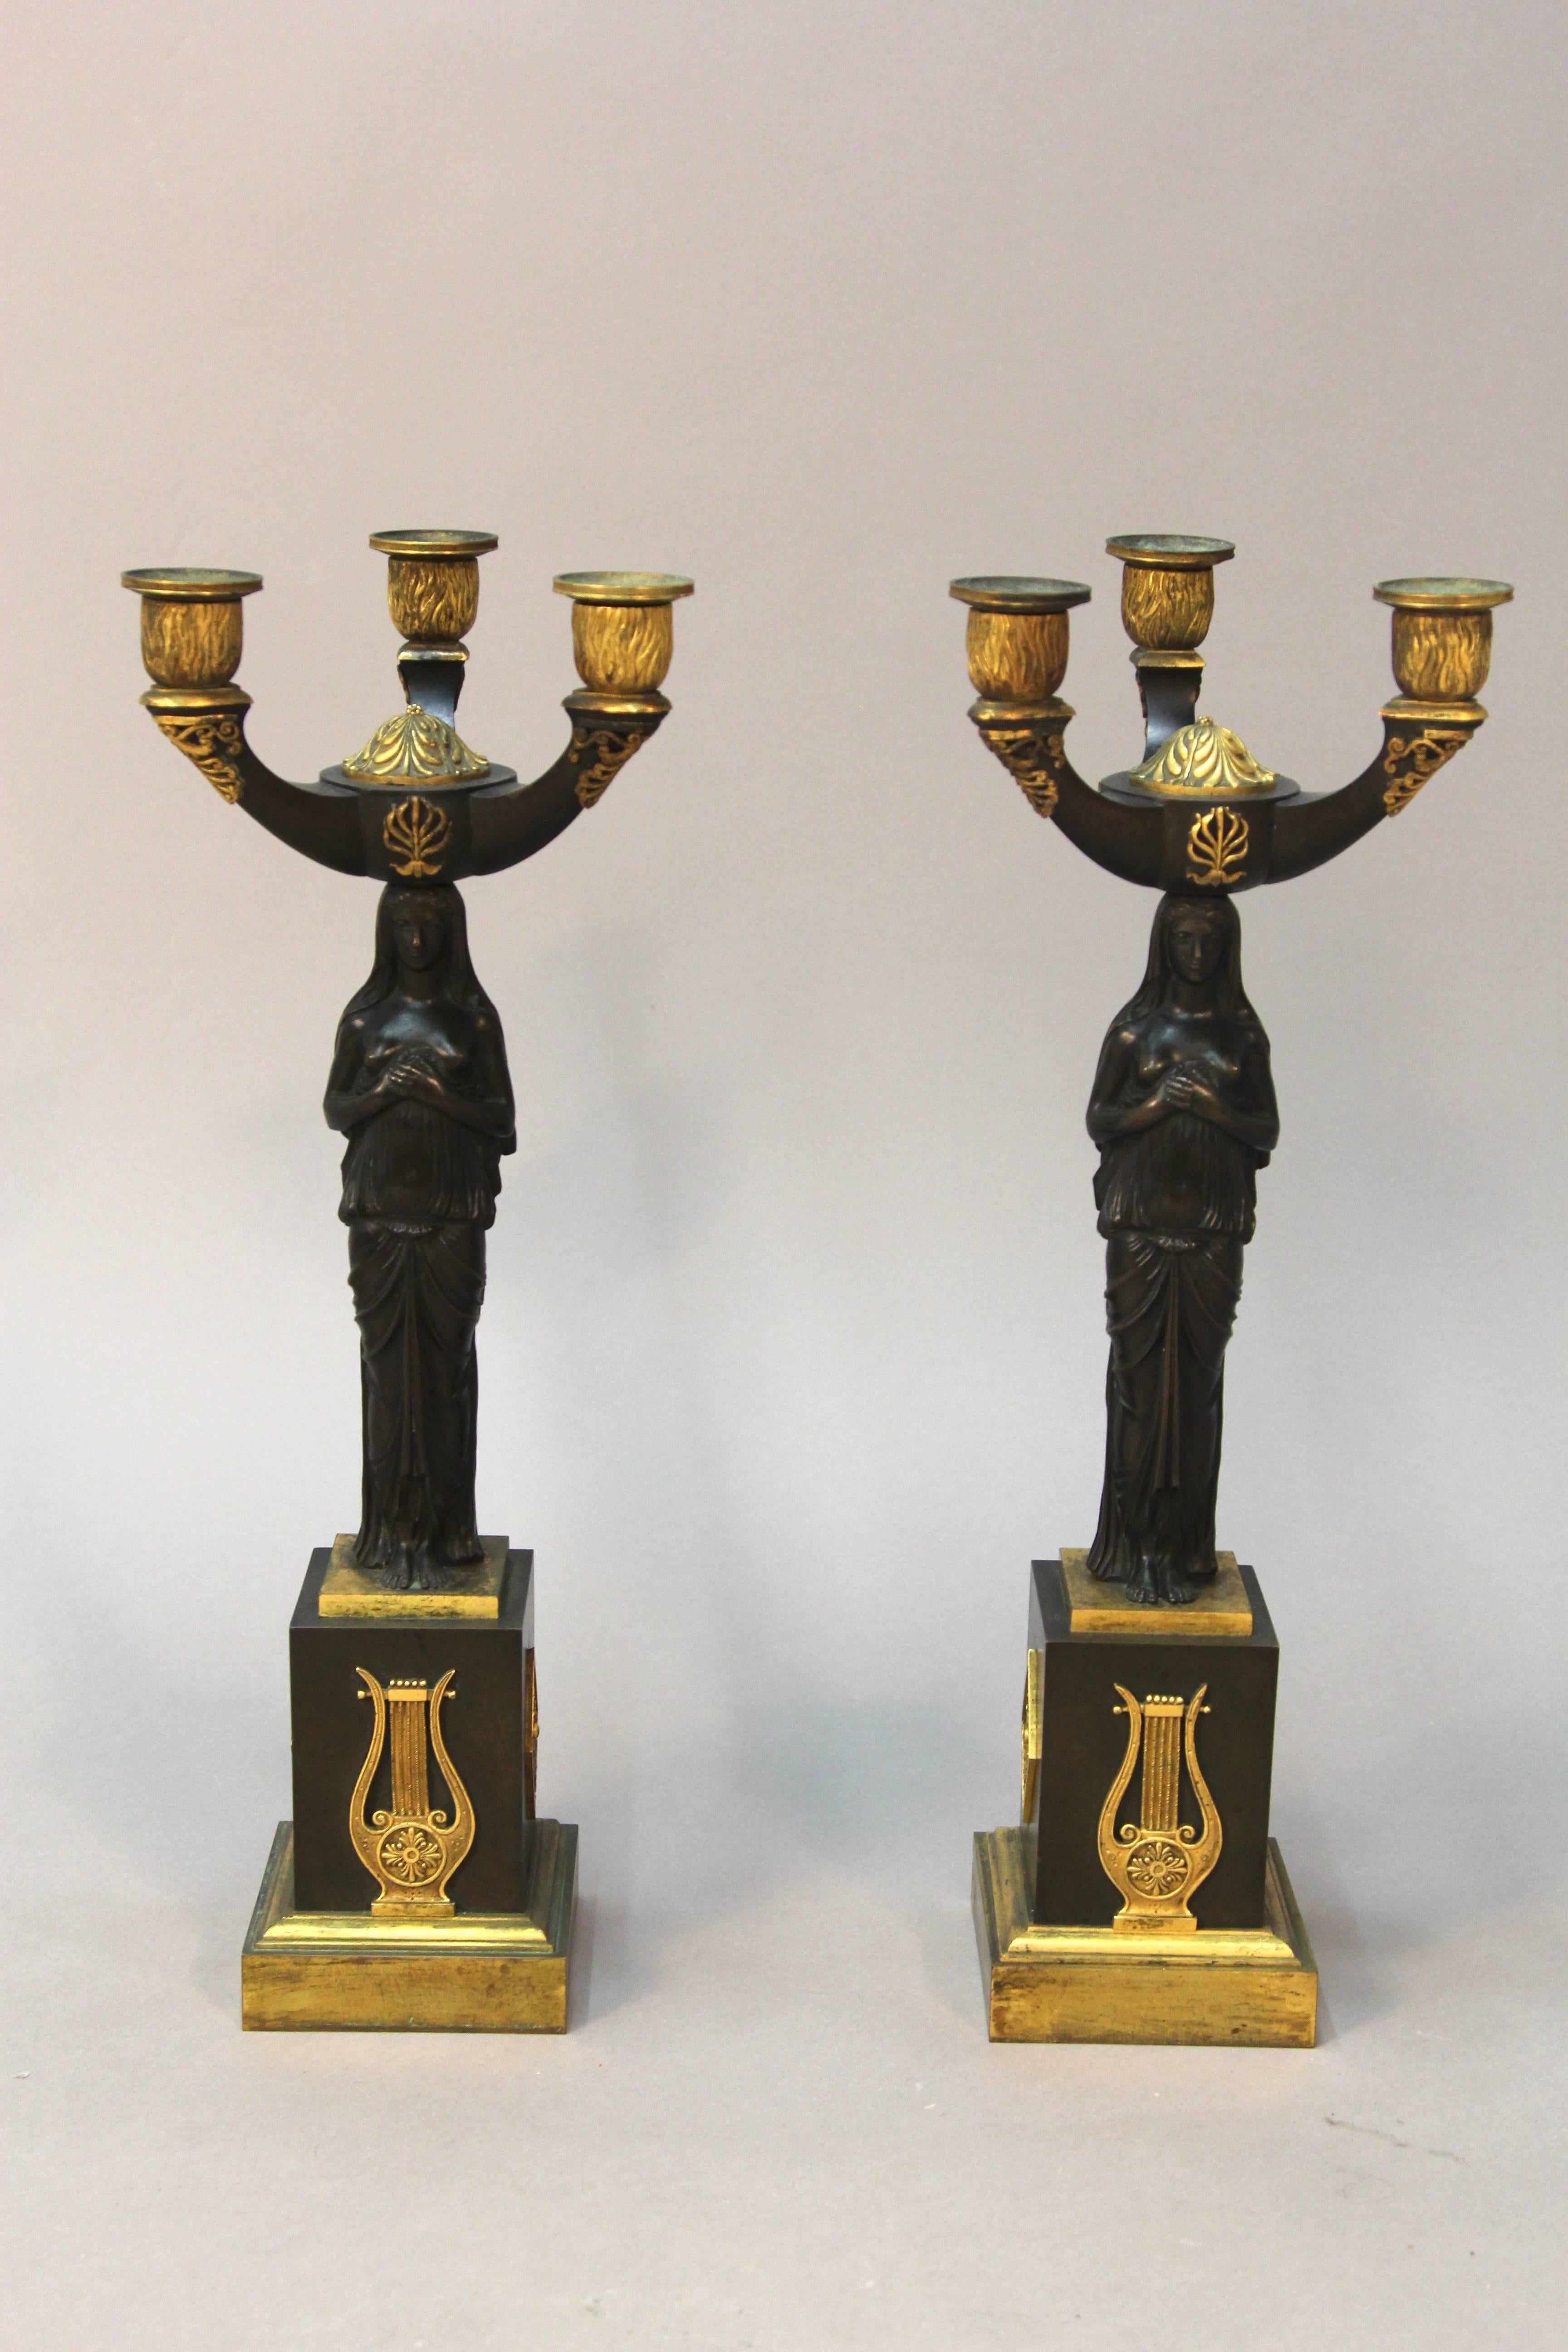 A very fine pair of circa early 1800s Empire gild gold bronze candelabras depicting classical women with breast exposed. Exquisite made, suggesting Russian 19th century manufacturing.